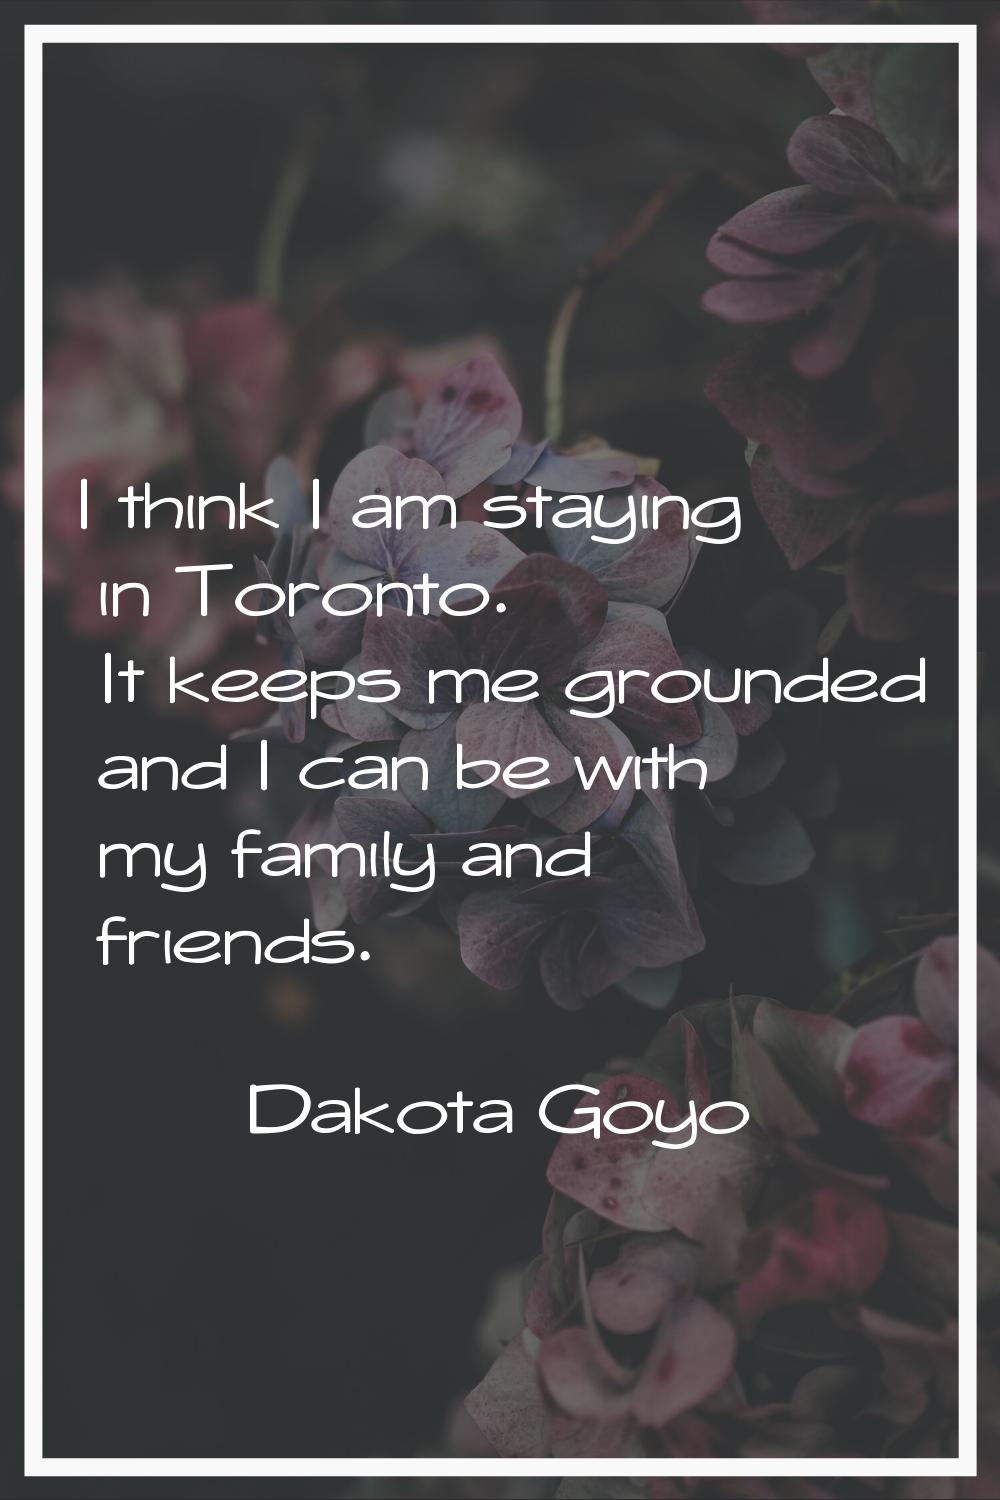 I think I am staying in Toronto. It keeps me grounded and I can be with my family and friends.